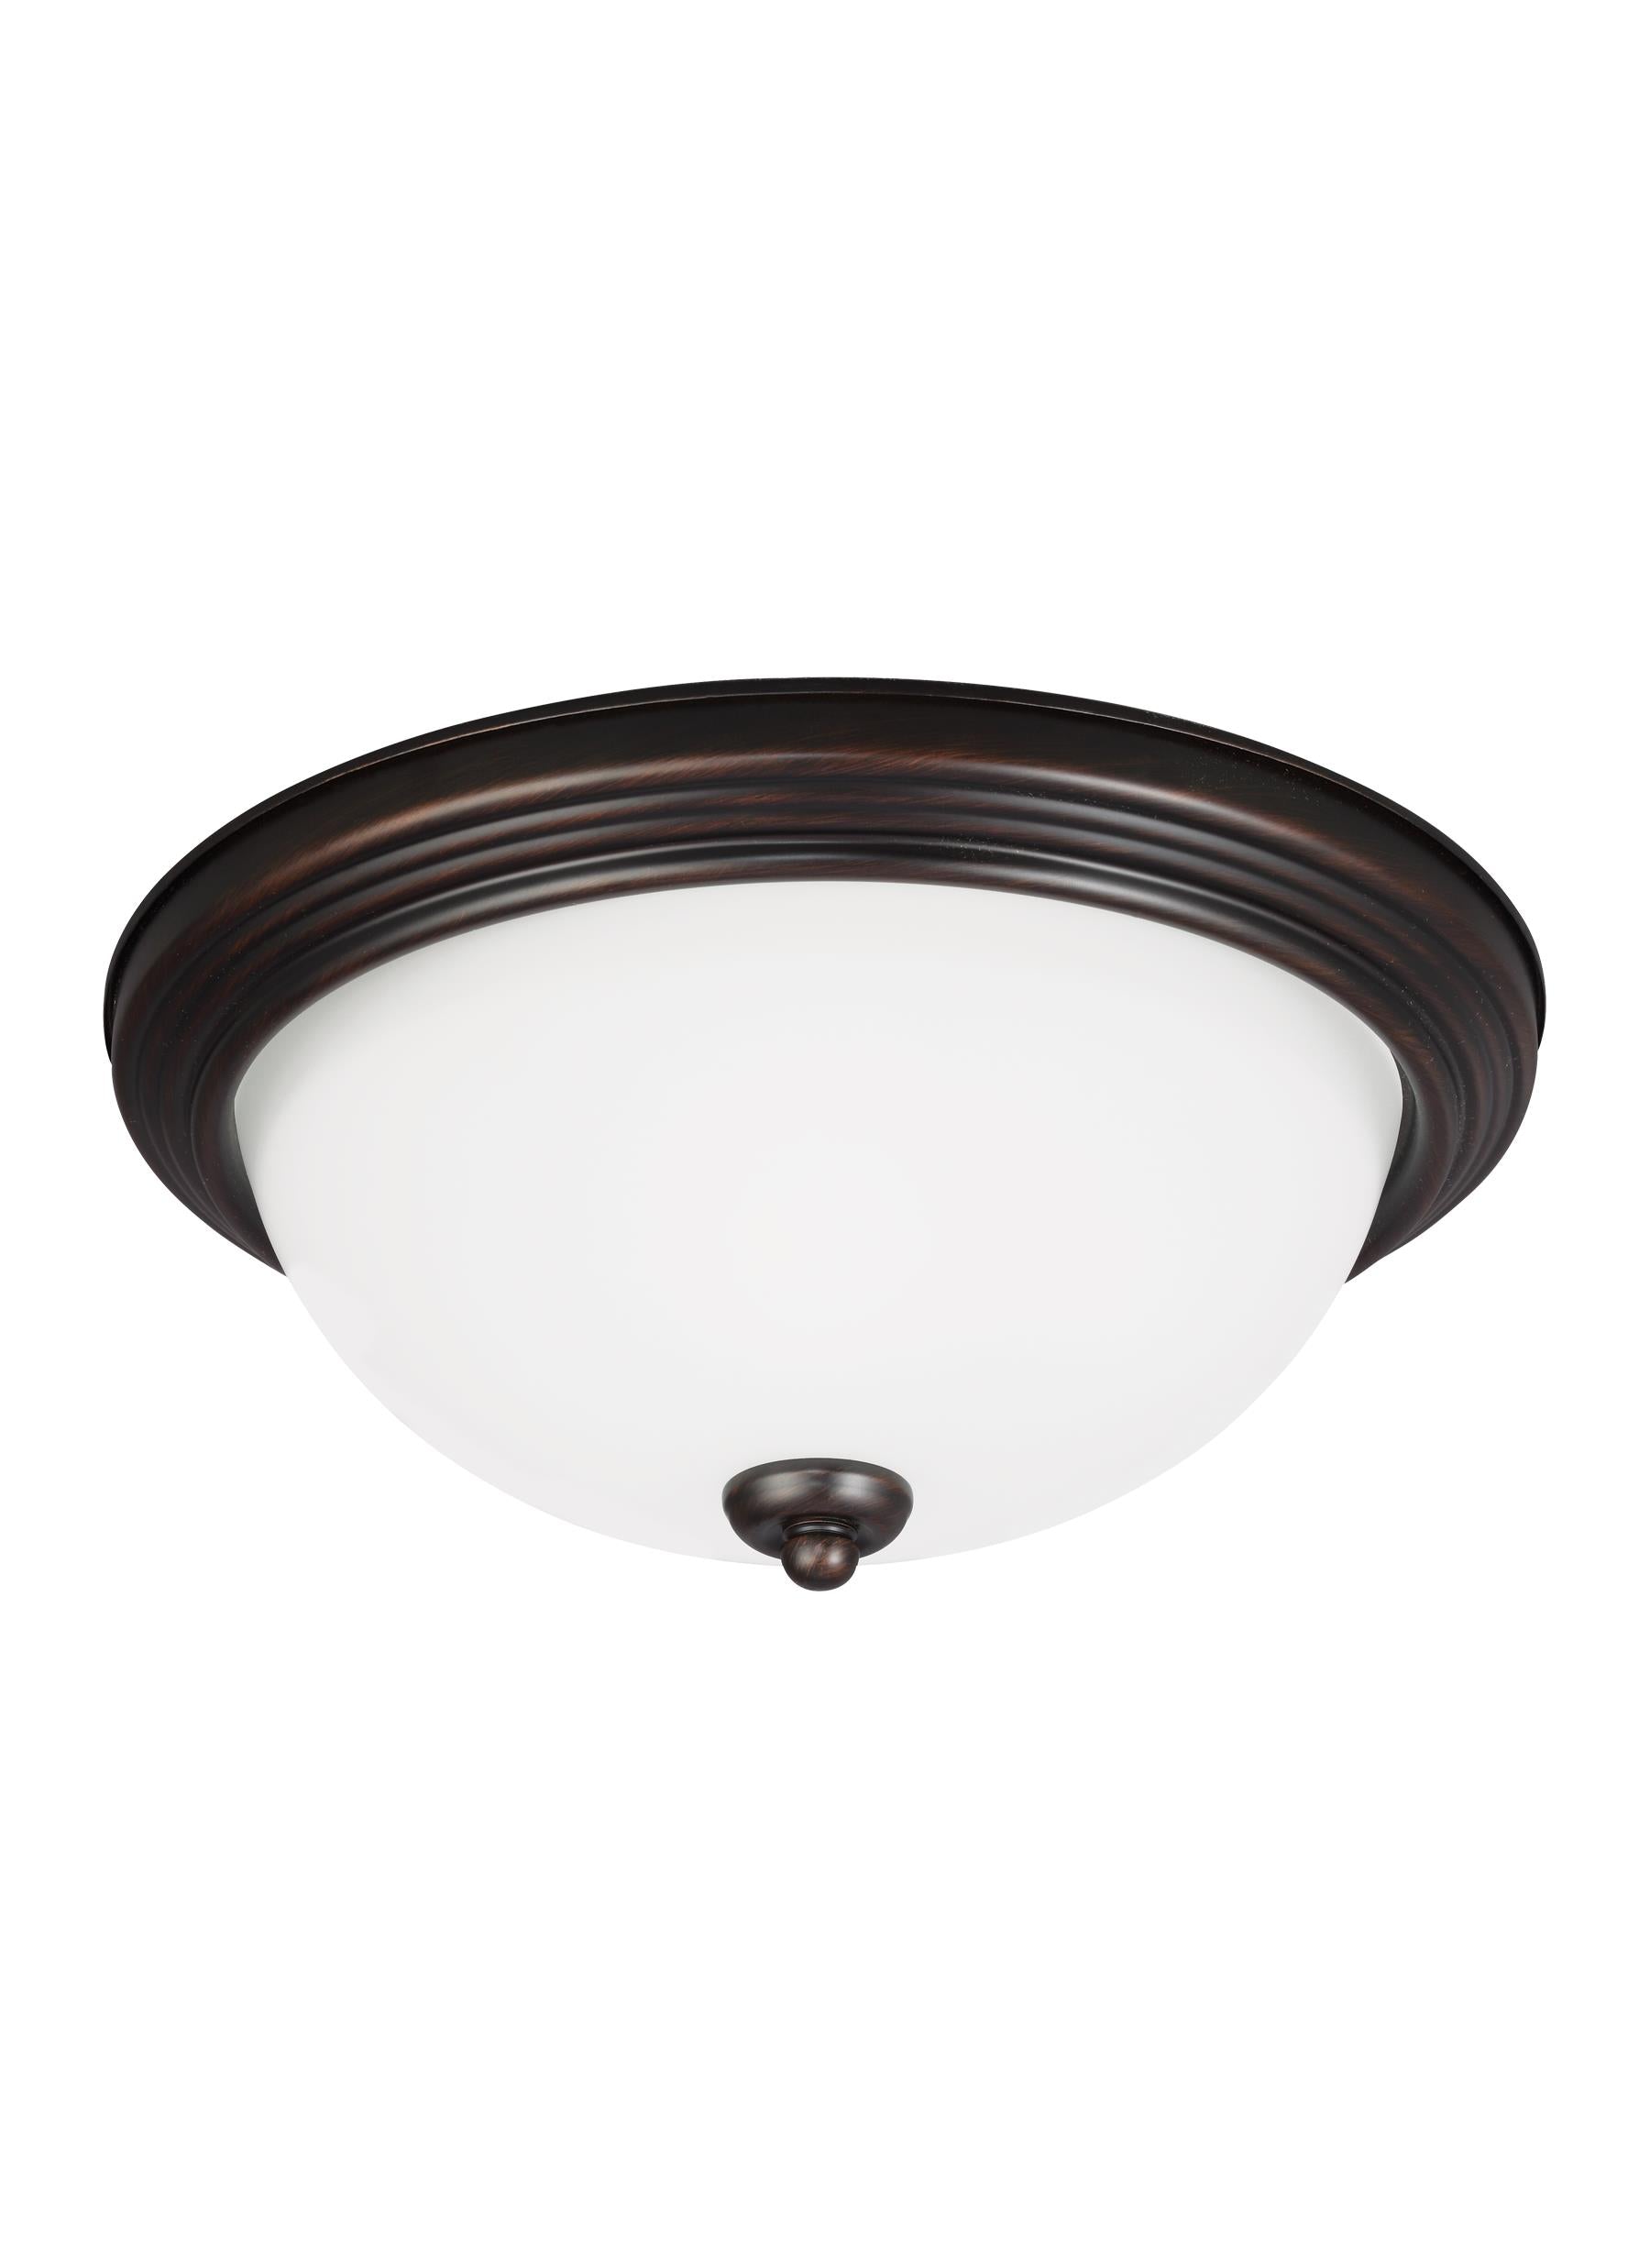 Geary transitional 1-light indoor dimmable ceiling flush mount fixture in bronze finish with satin etched glass diffuser